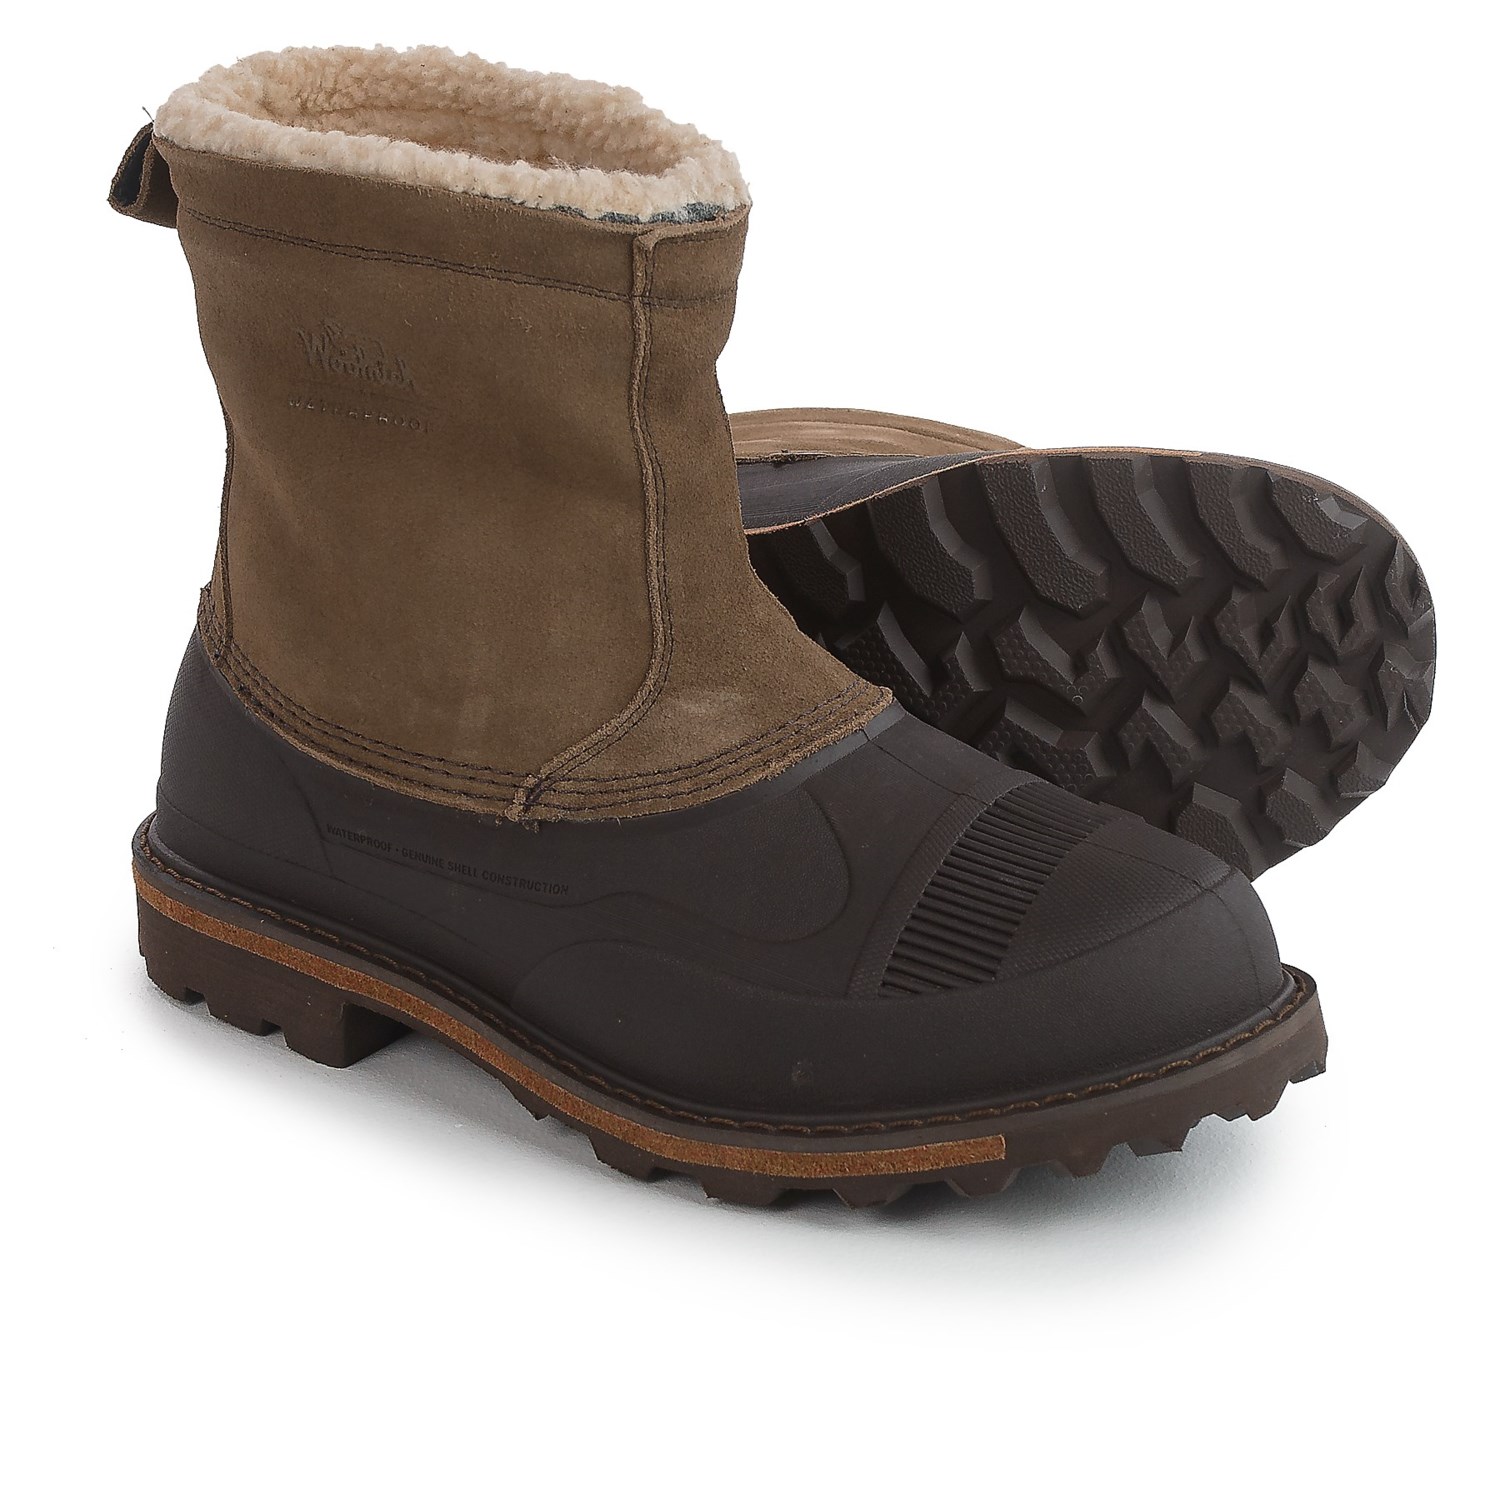 Woolrich Fully Wooly Slip-On Pac Boots (For Men)